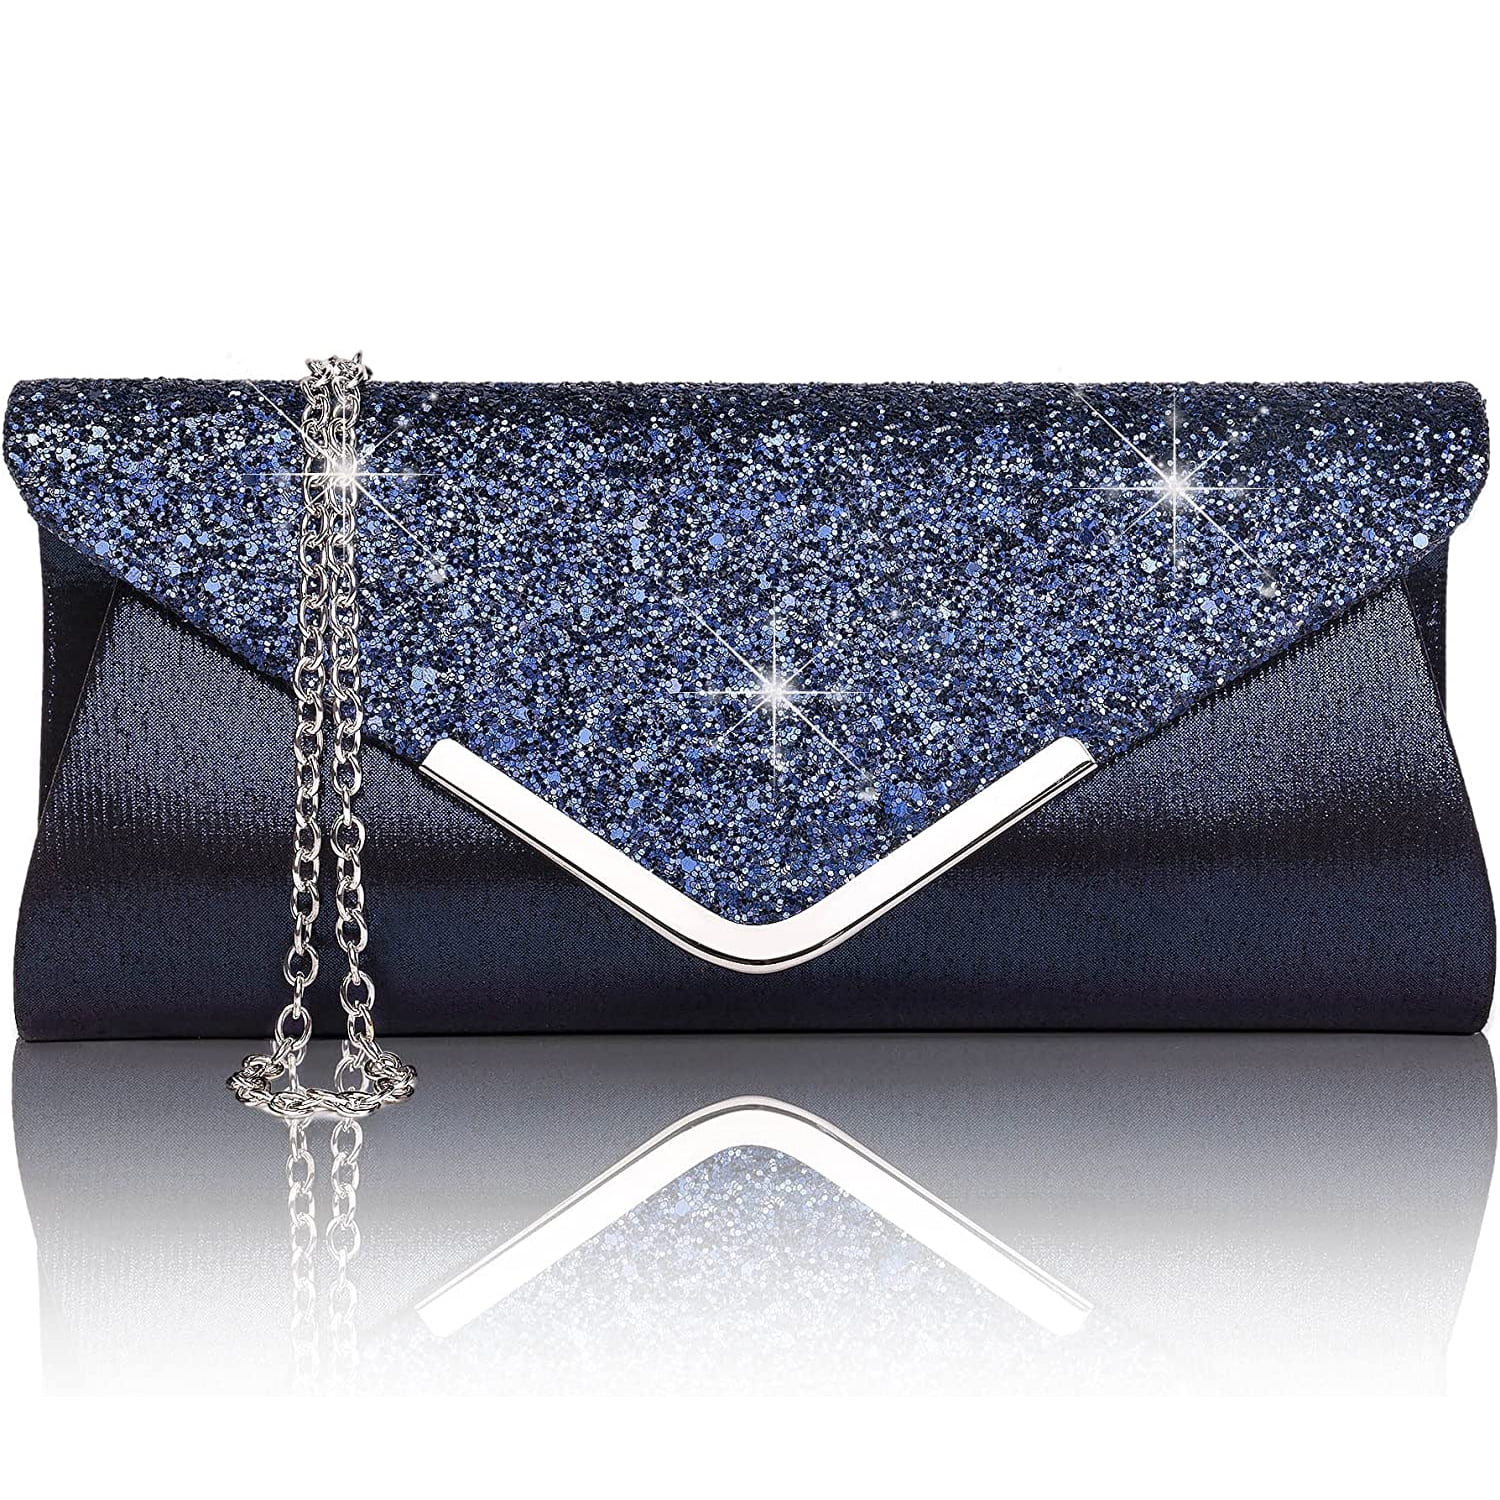 Tinksky Sparkly Sequin Handbag Lady Party Evening Clutch Shoulder Bag,  Mother's Day gift or gift for women (Black), 10 * 7.1 * 0.8 inch: Handbags:  Amazon.com